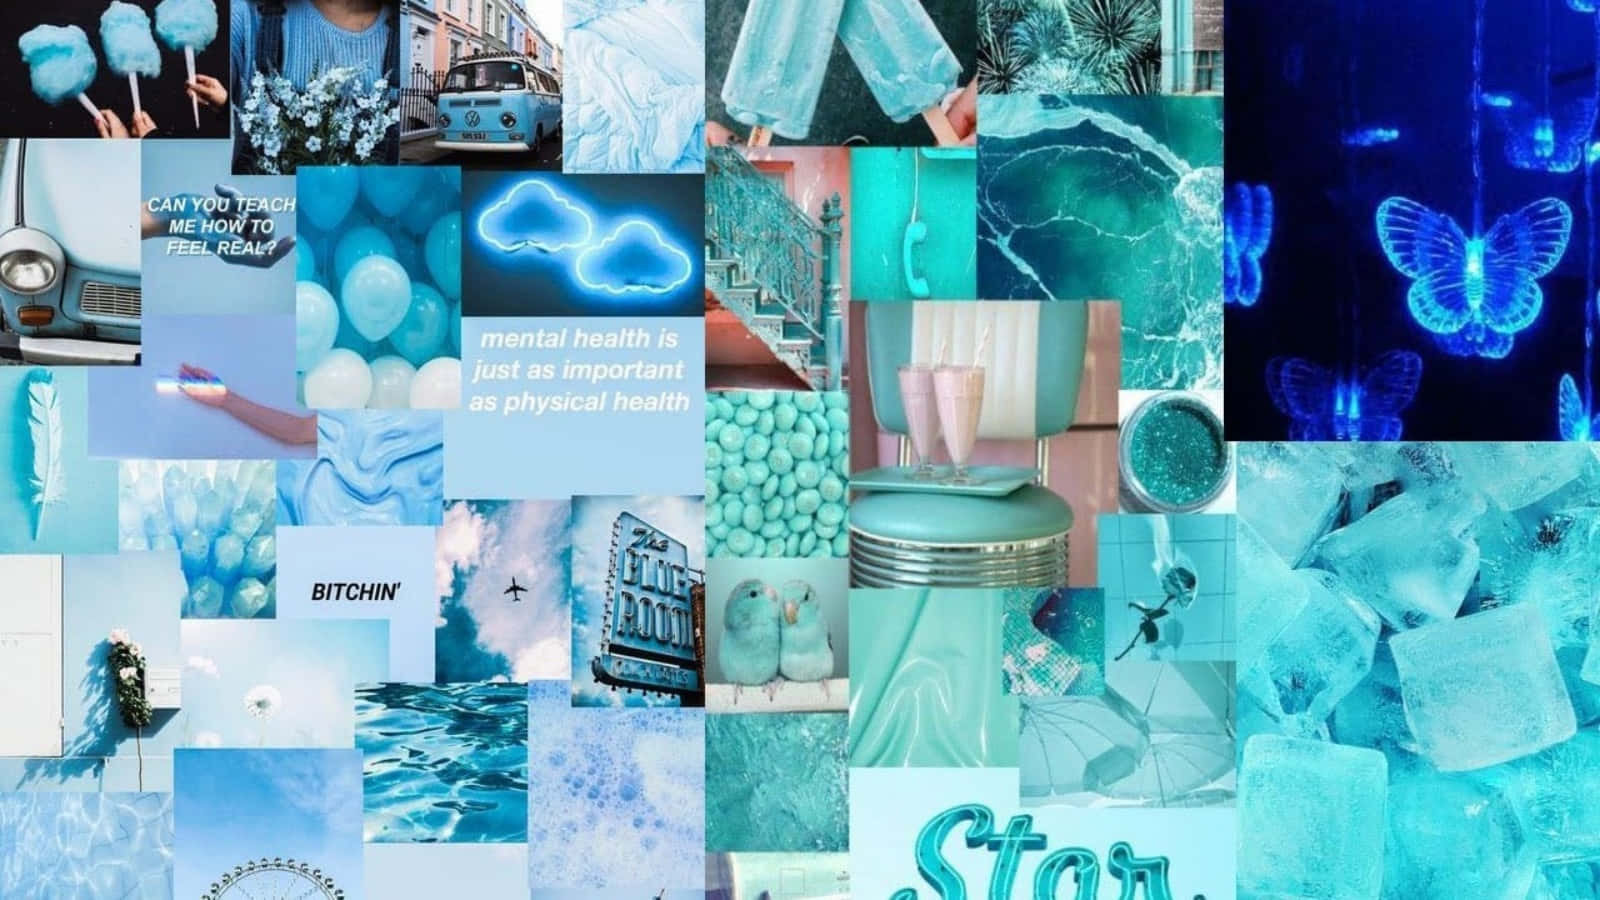 Download A Collage Of Blue Pictures With A Star Wallpaper | Wallpapers.com